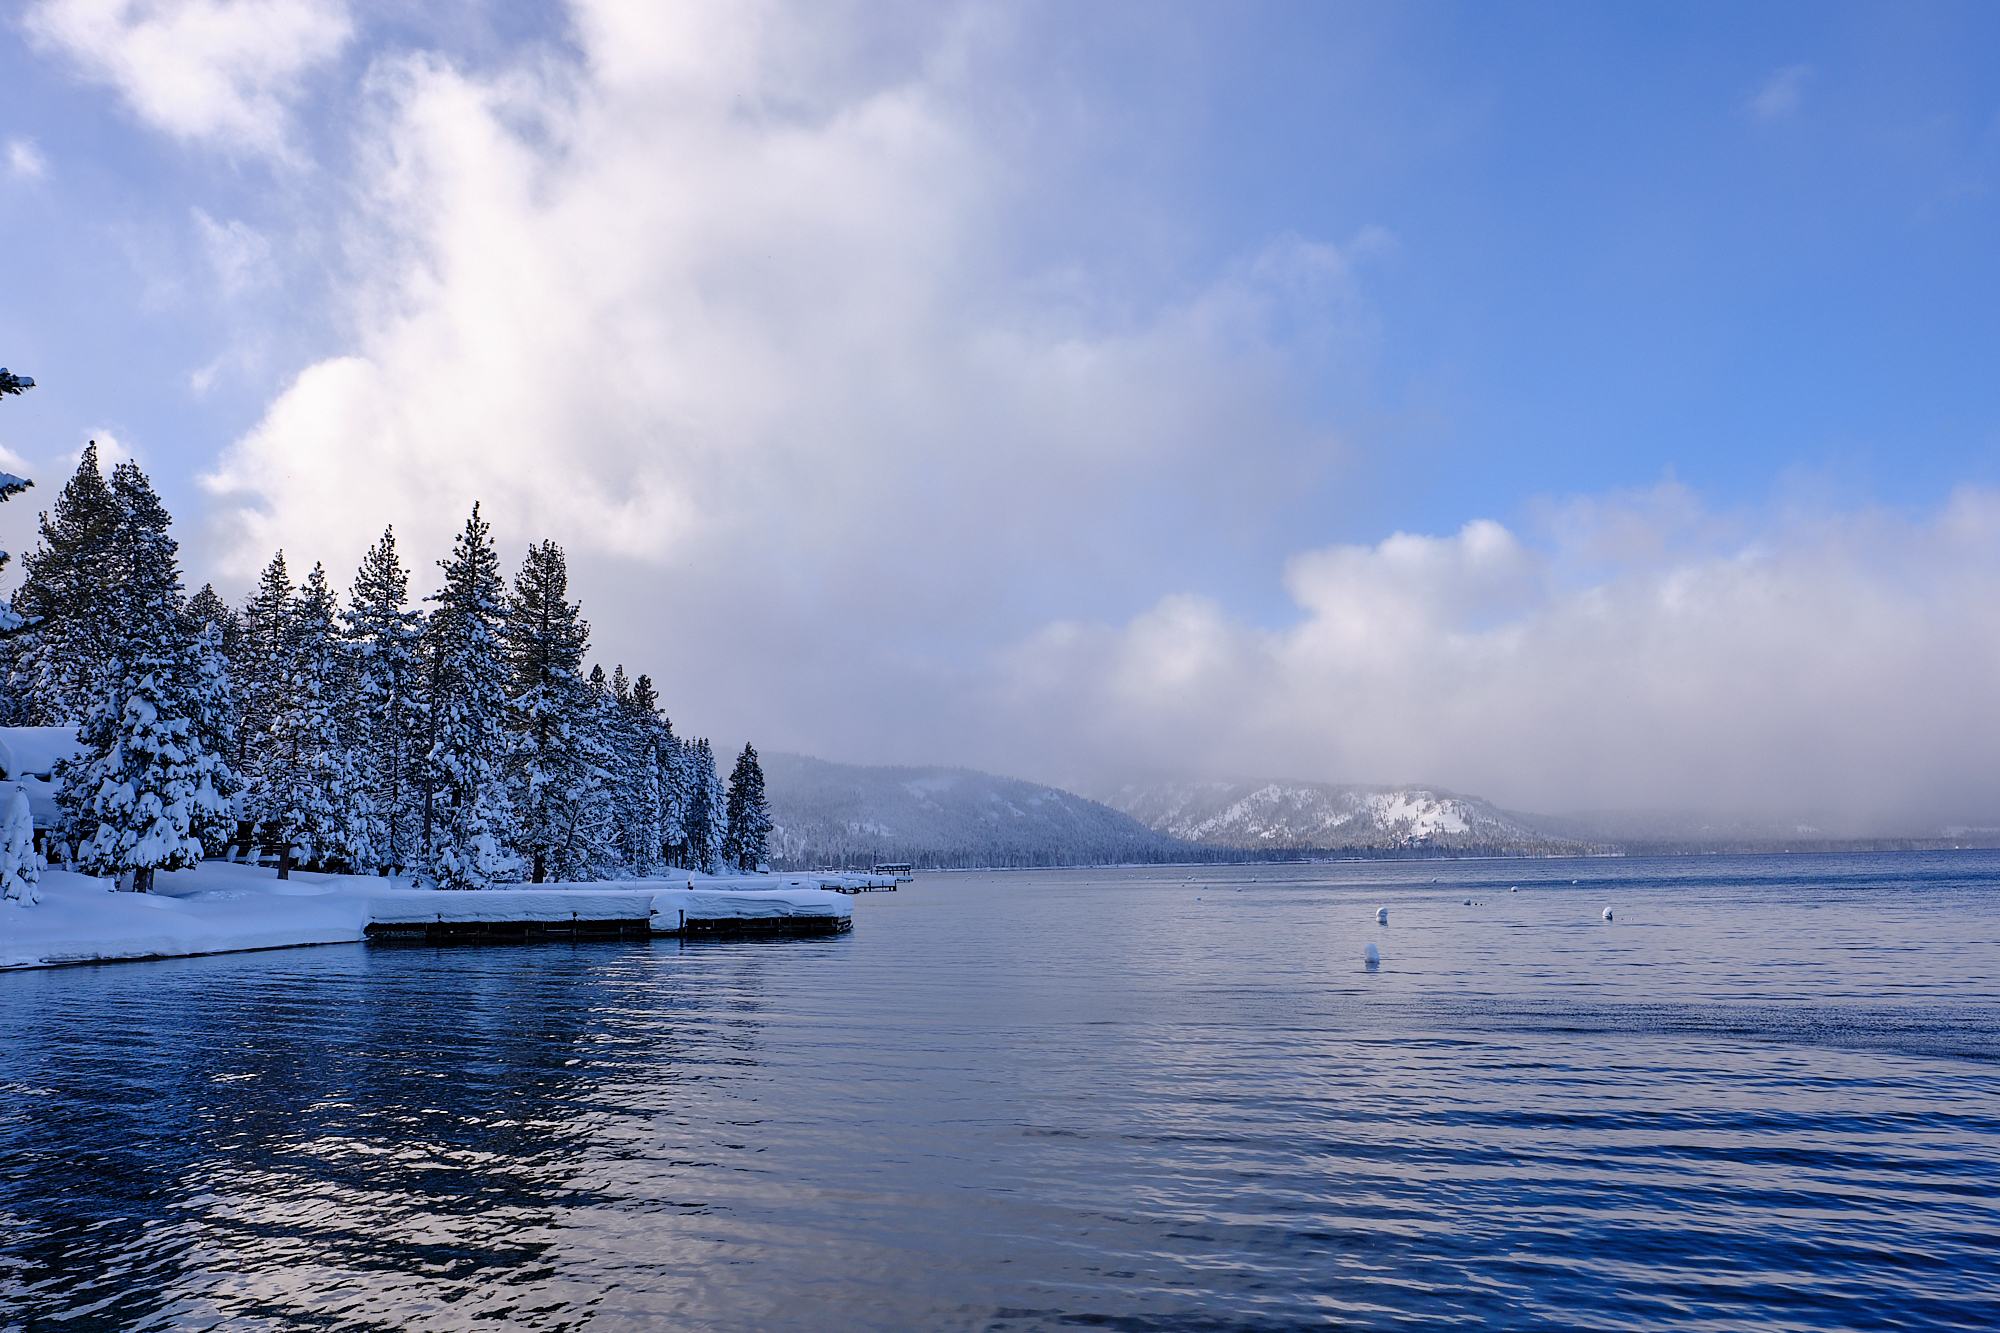  After several days of intense storms, the lake finally came back into view. Lake Tahoe is the largest and highest alpine lake in North America, and the second deepest at 1,645 feet. | Tahoma, CA 2/10/19 